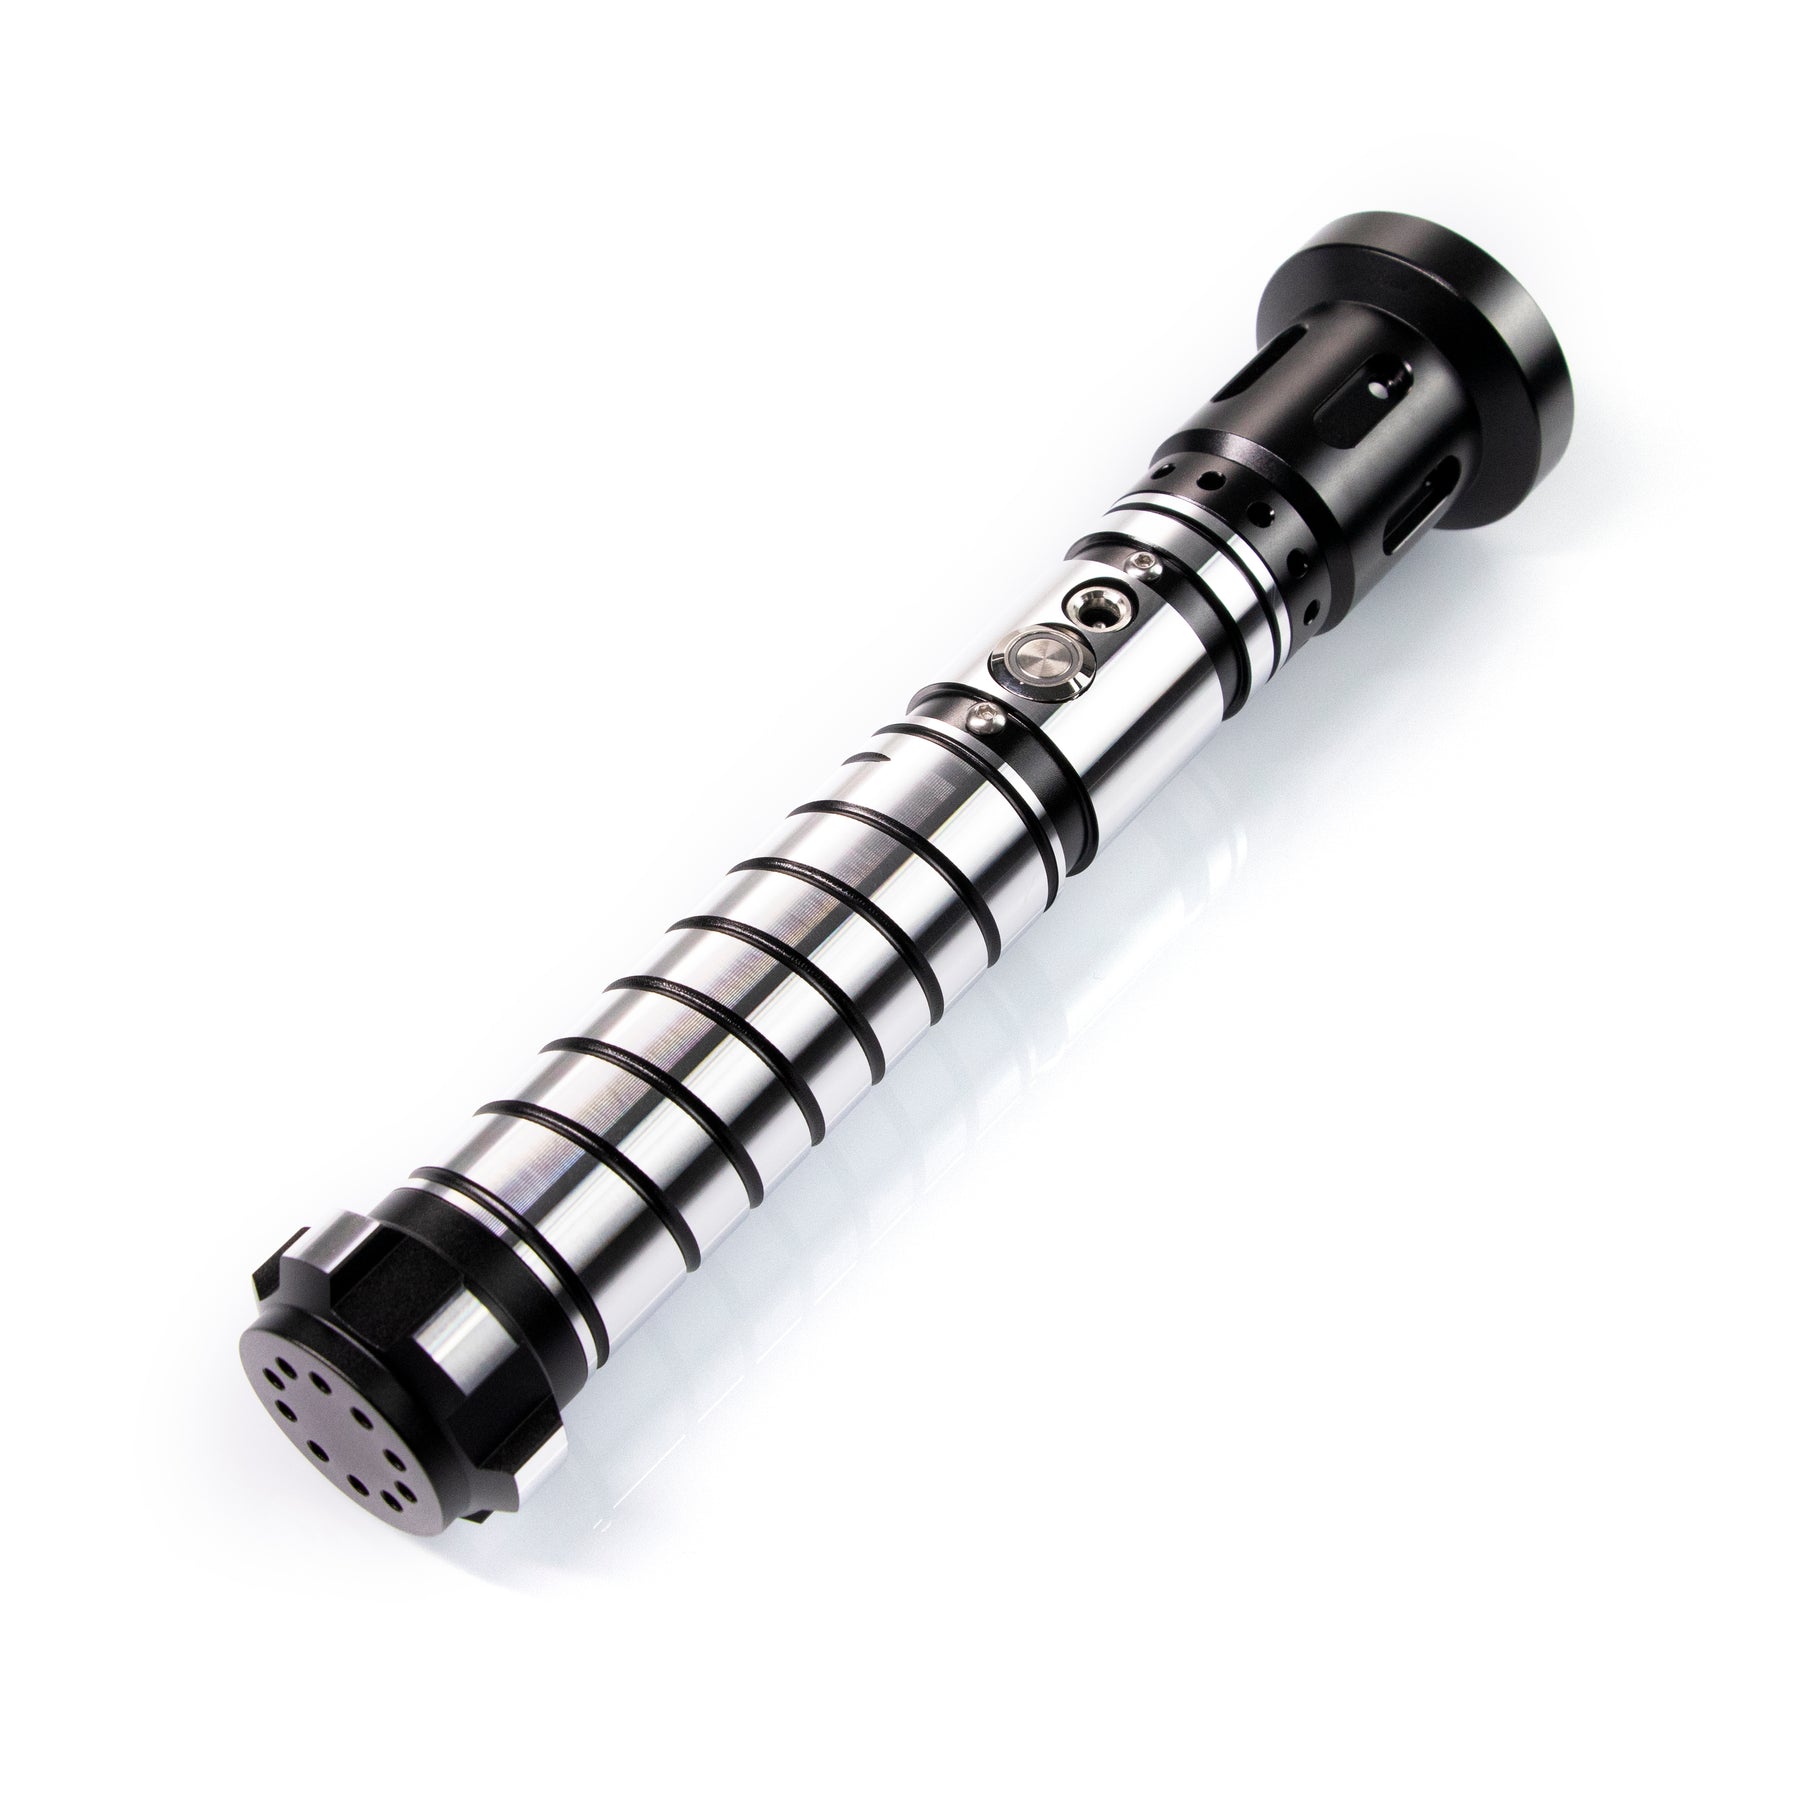 SaberCustom lightsaber RGBX, Xenopixel and Proffie available C004